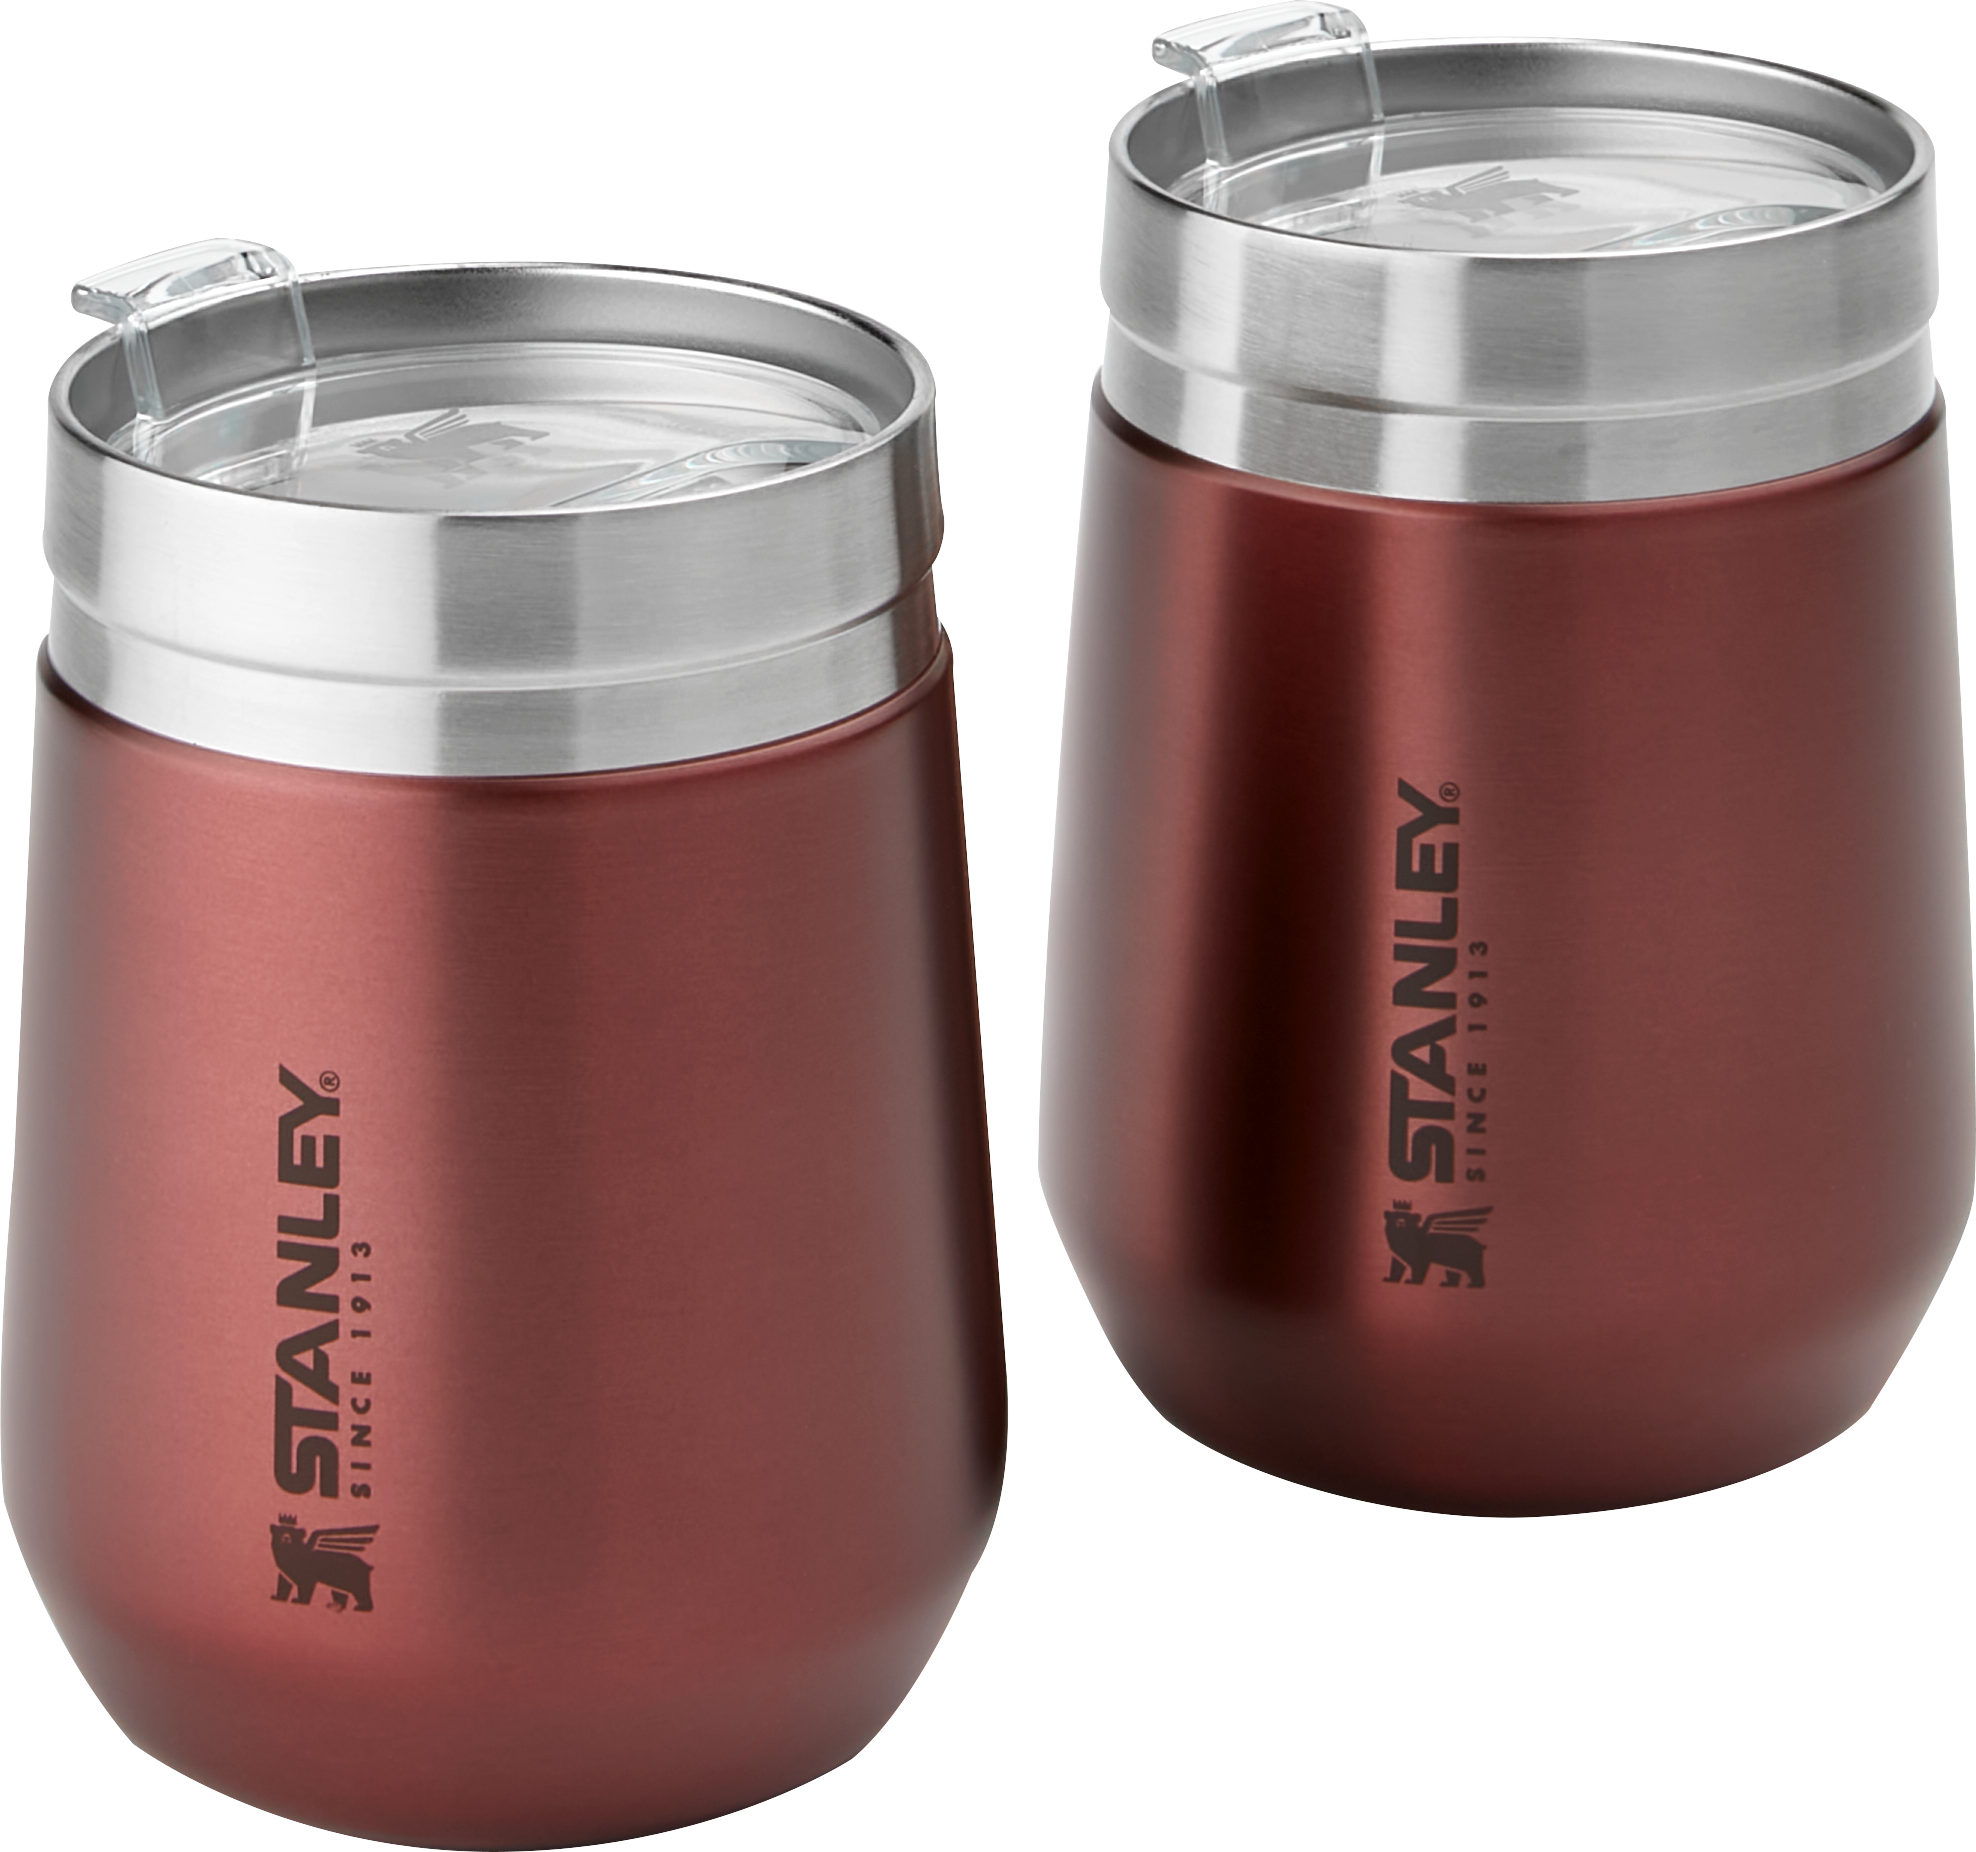 Stanley Classic Thermos | Gifts| Men's Wearhouse